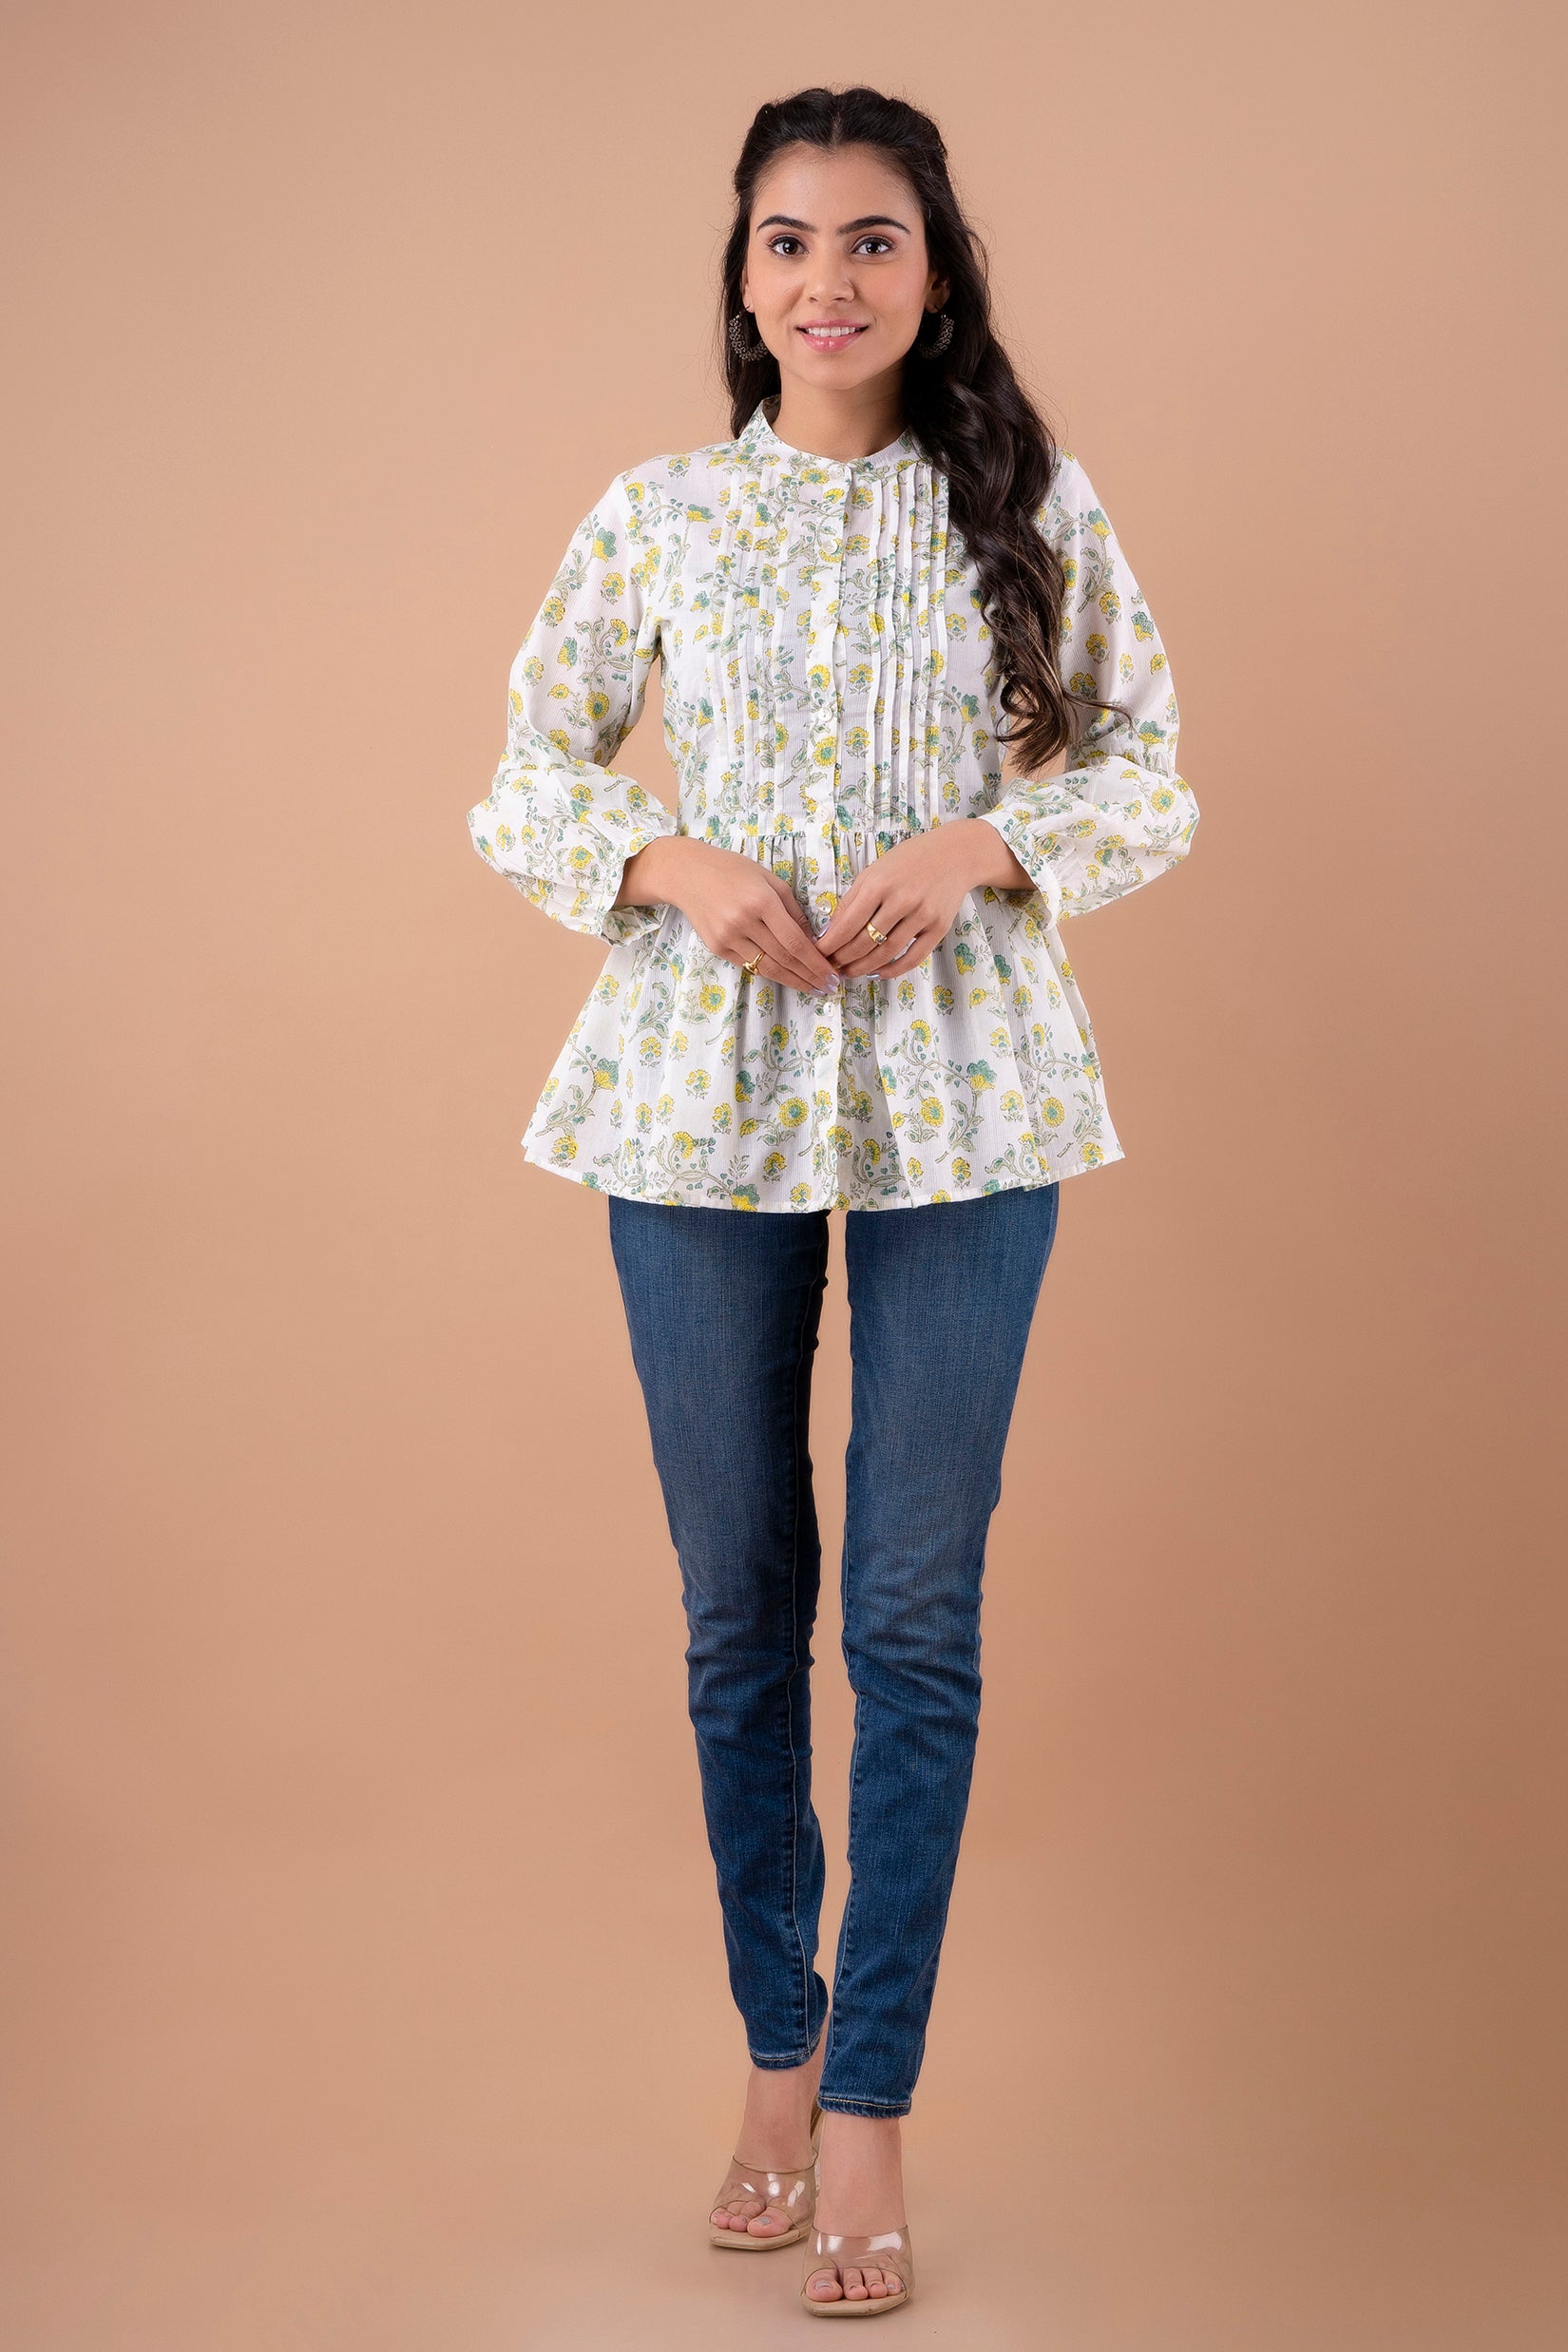 Casual Wear Girls Frock Style Top, Cotton at best price in Ahmedabad | ID:  25225460830